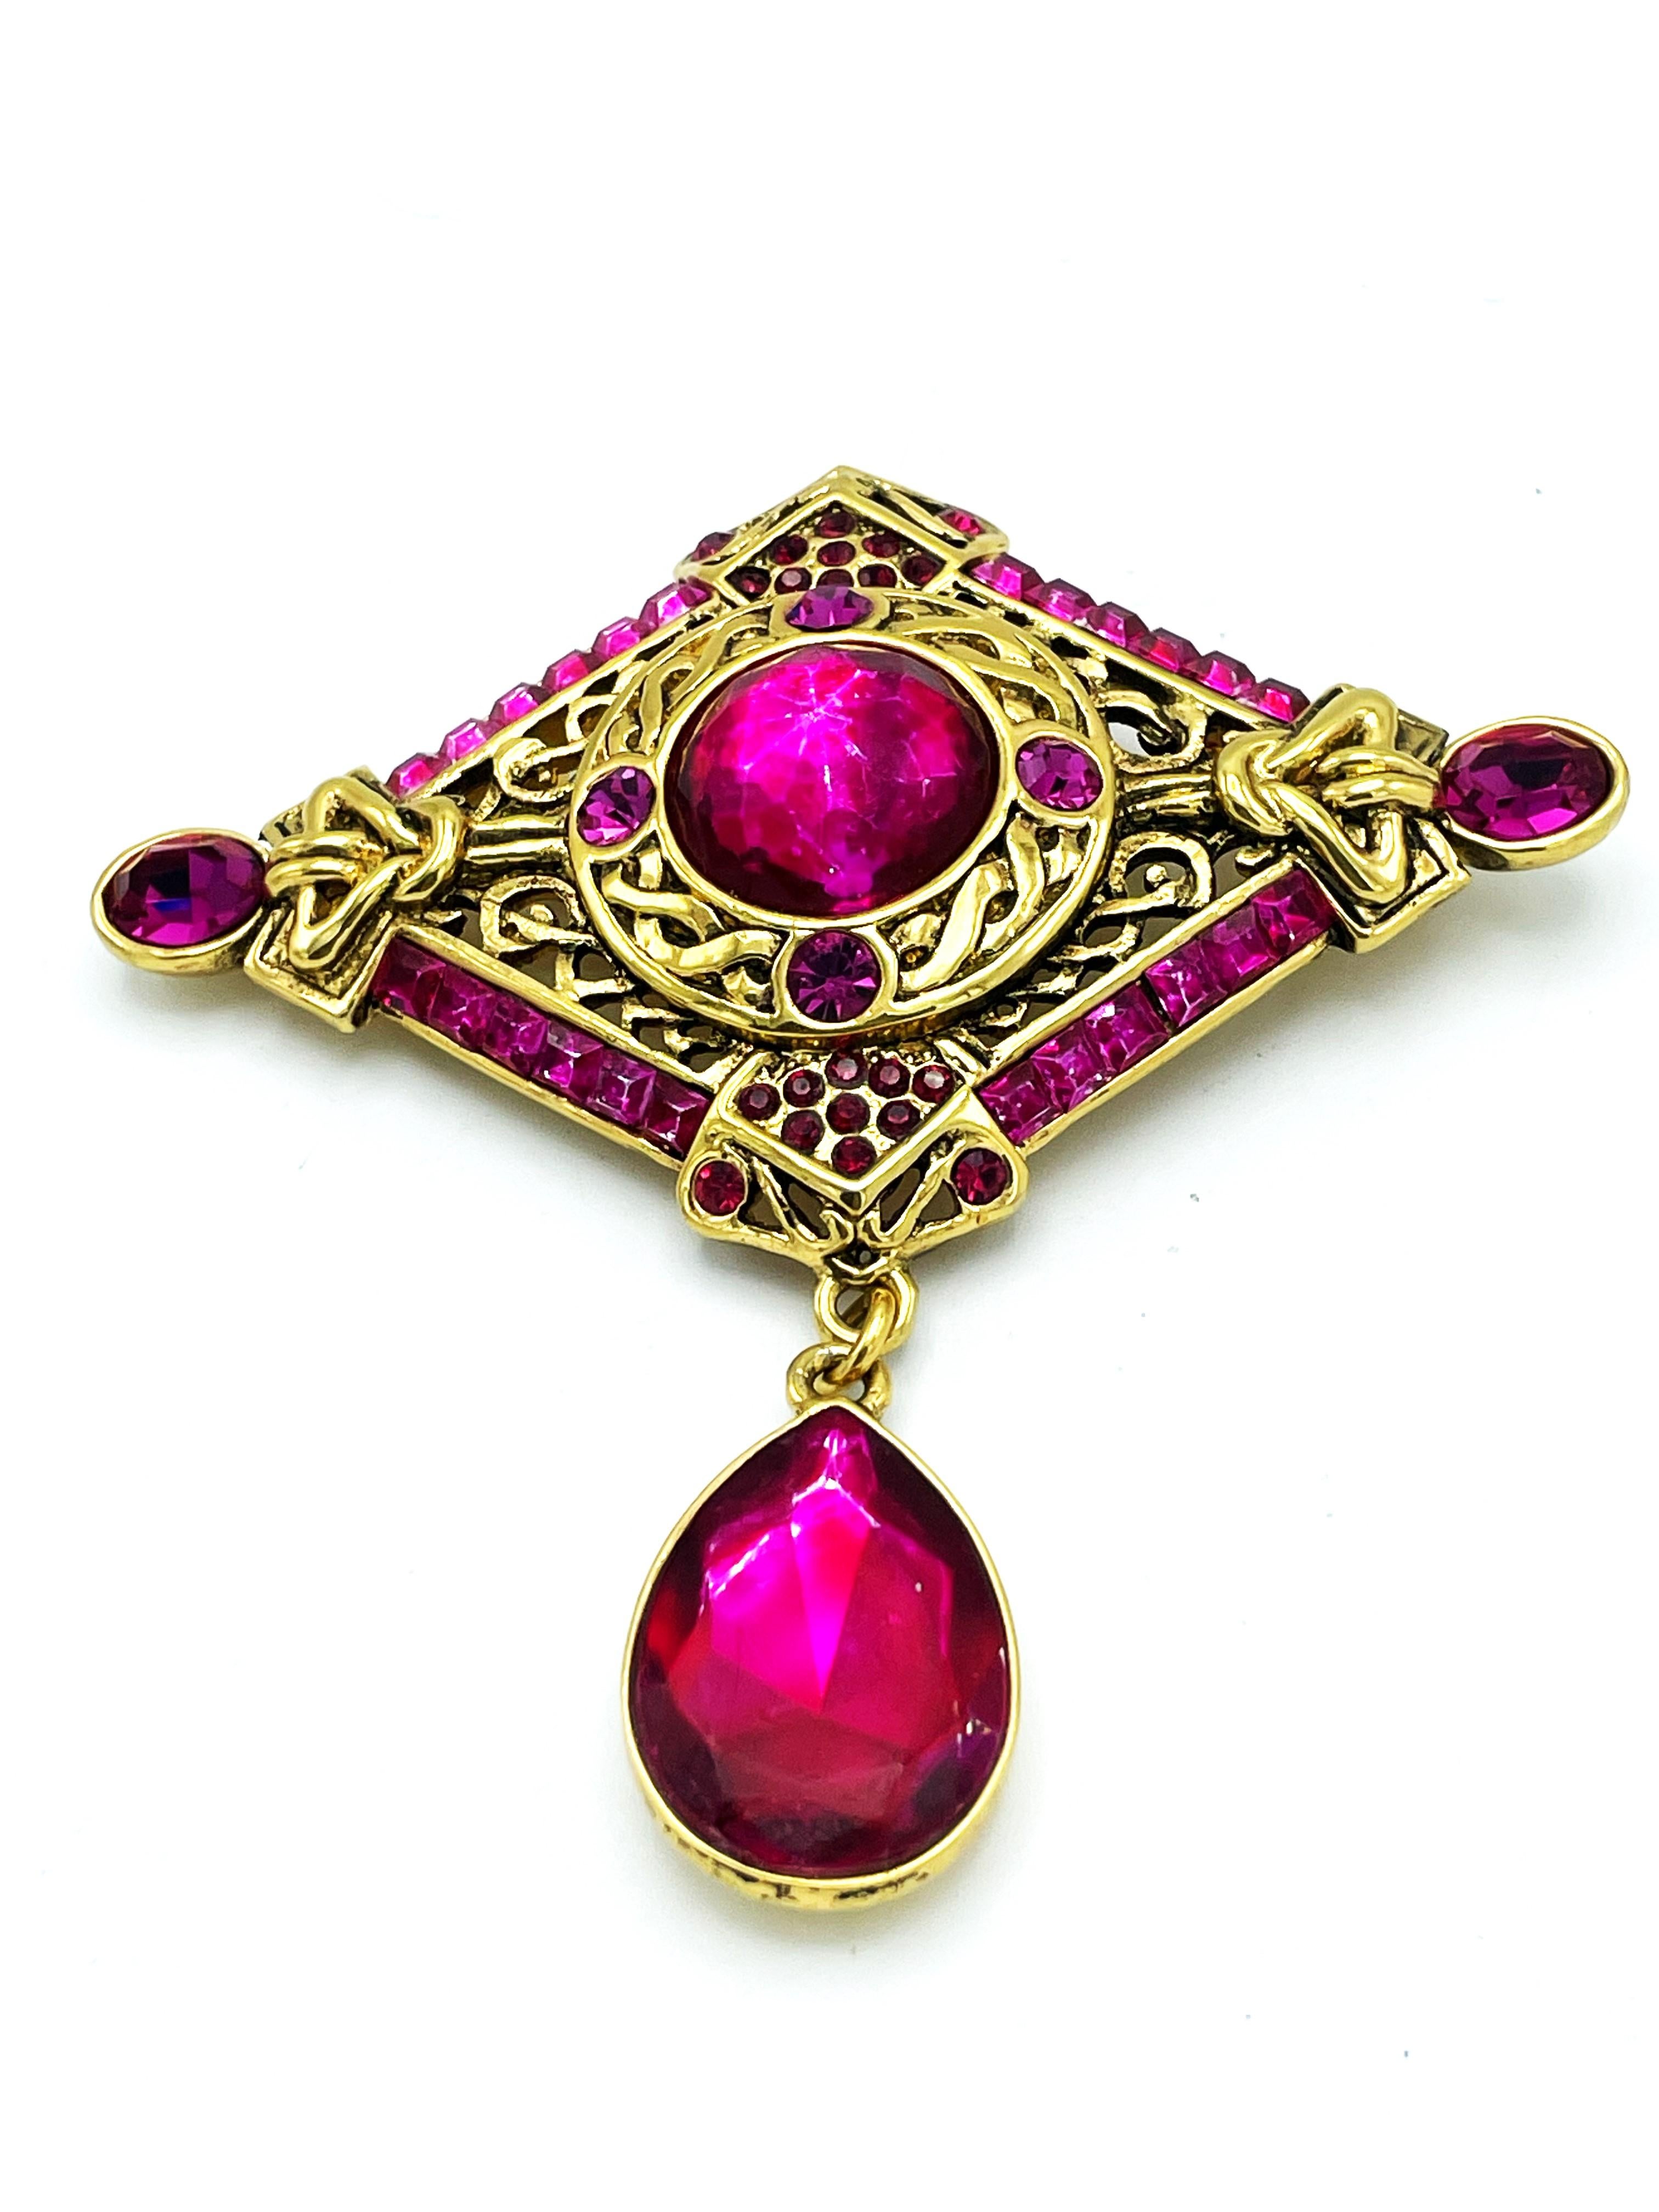 Christian Dior (Made in France) gold plated metal Brooch with many pink rhinestones and a larg drop.

Additional information:
Dimension : Hight 10 cm with drop,  Length 10 cm, Dop in the middle 2 cm in diameter 
Signature:   Christian Dior